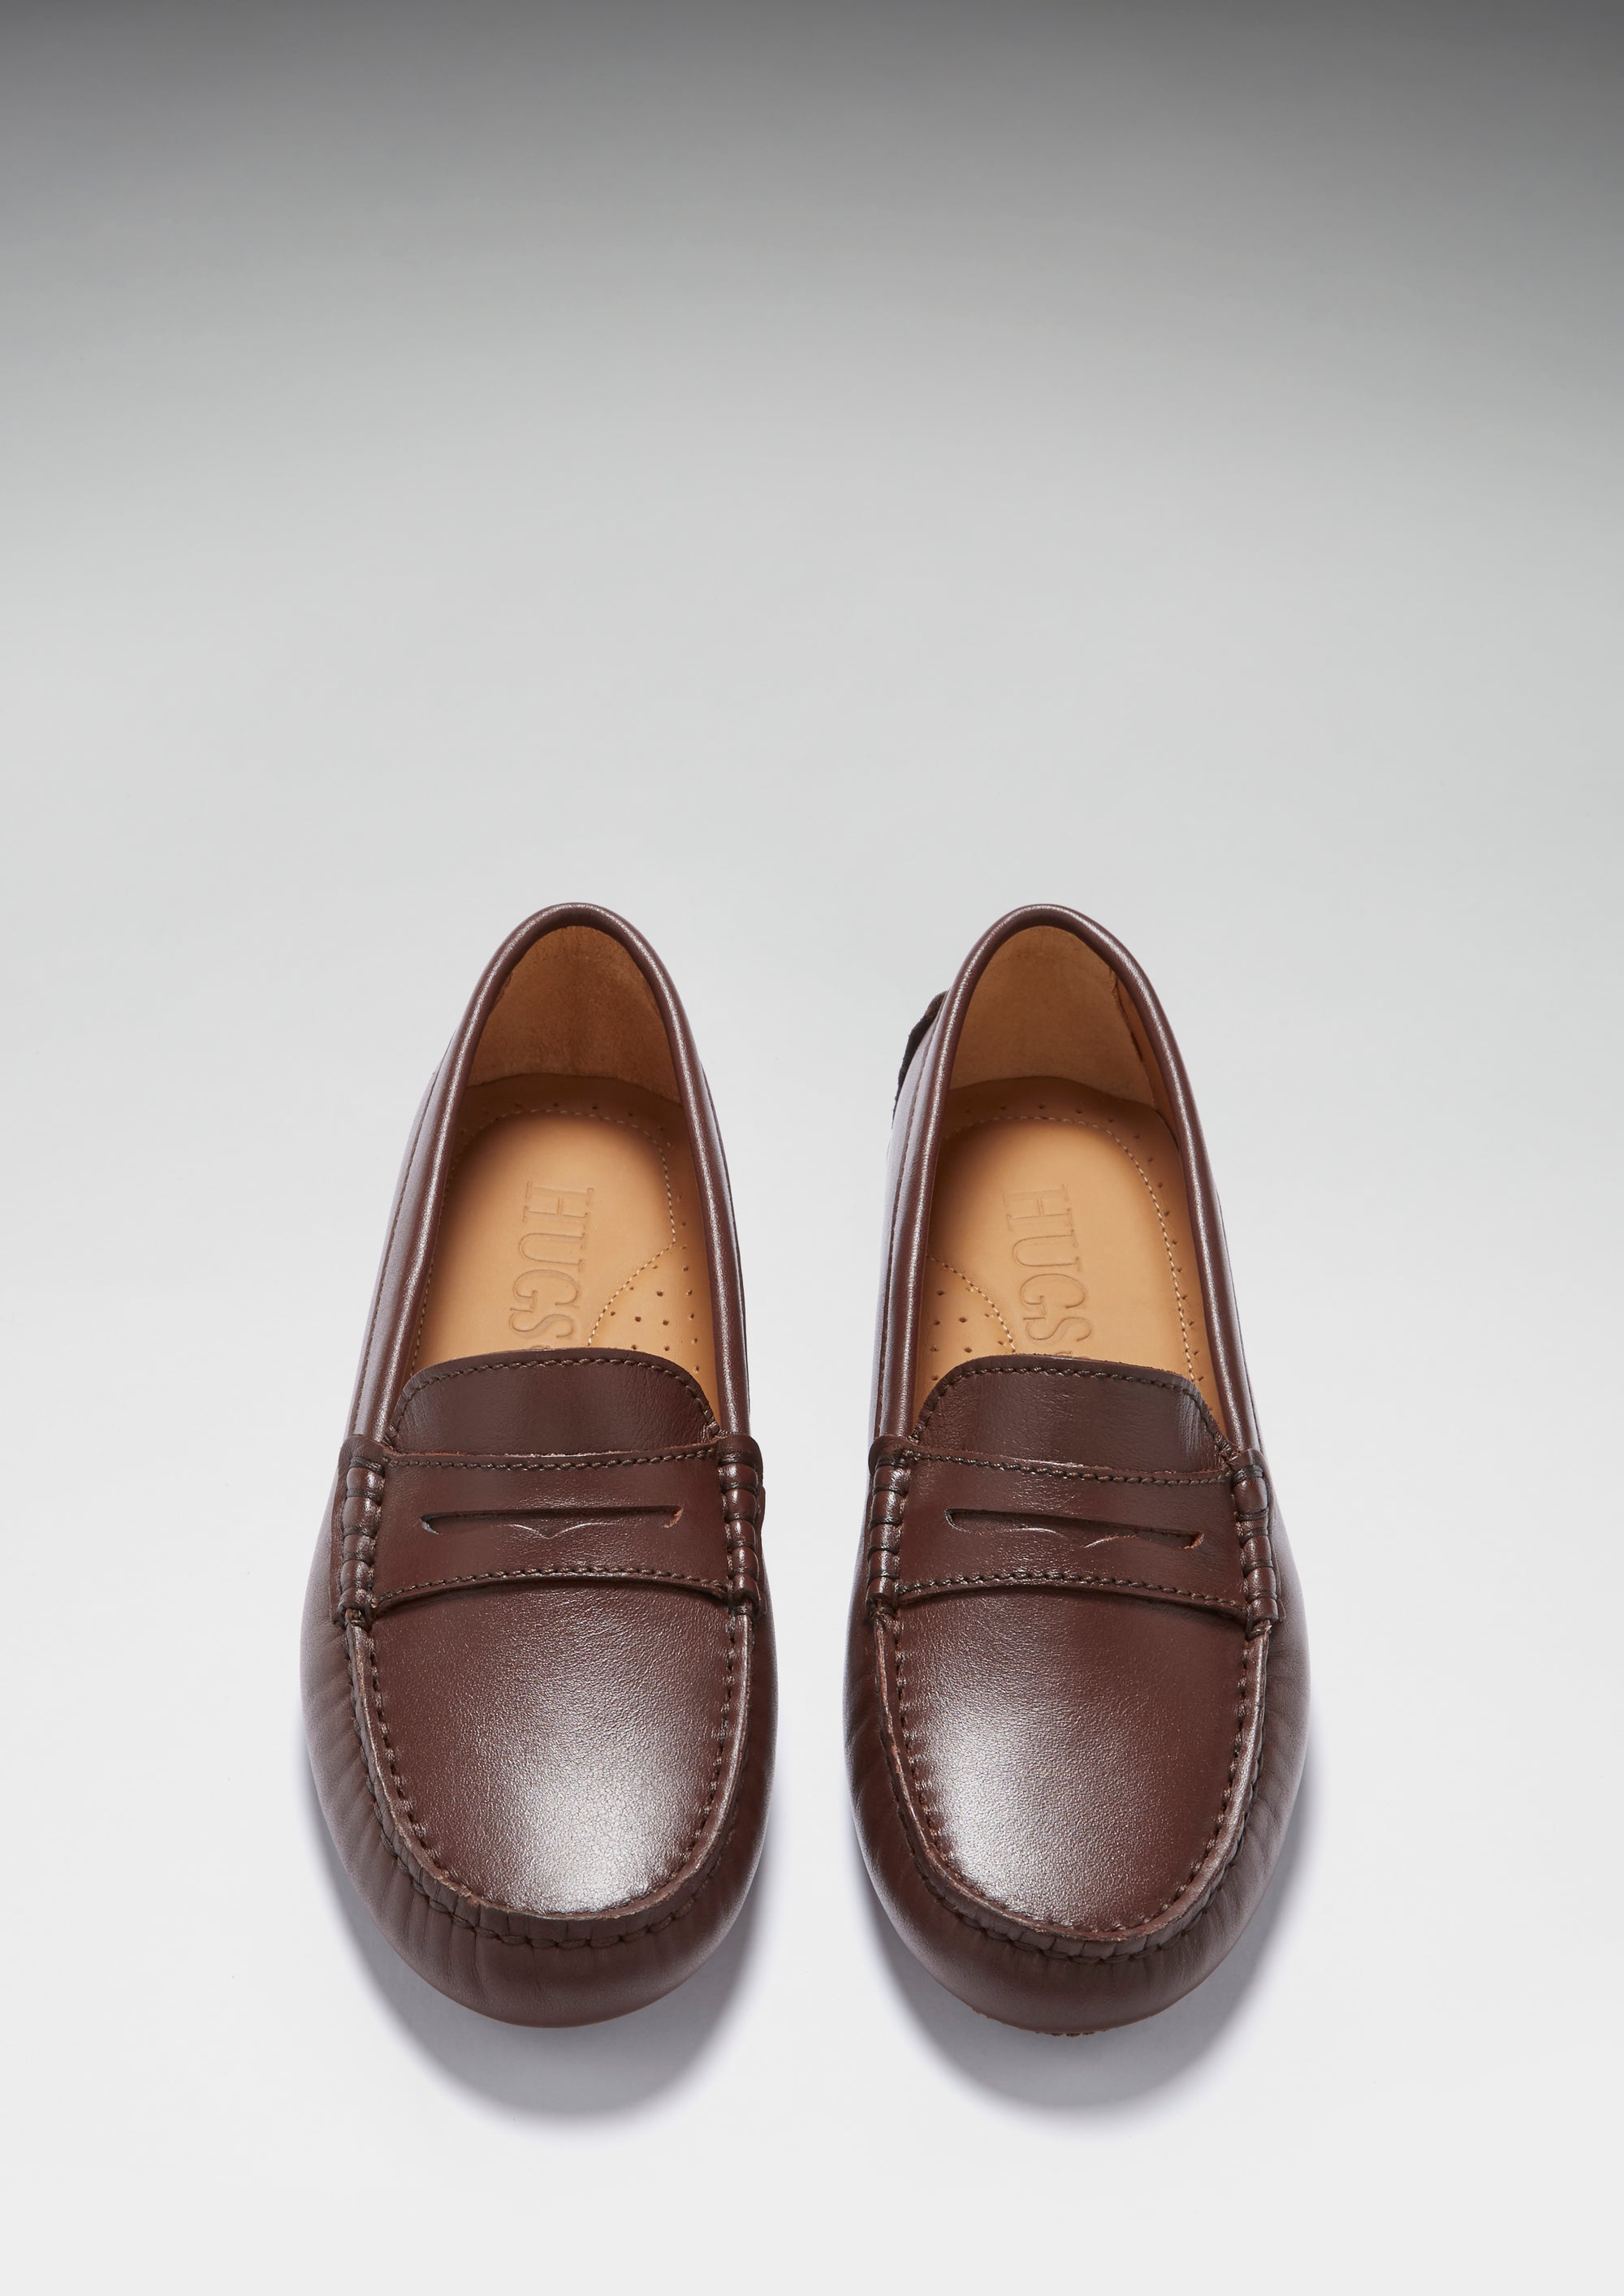 Women's Penny Driving Loafers, brown leather - Hugs & Co.